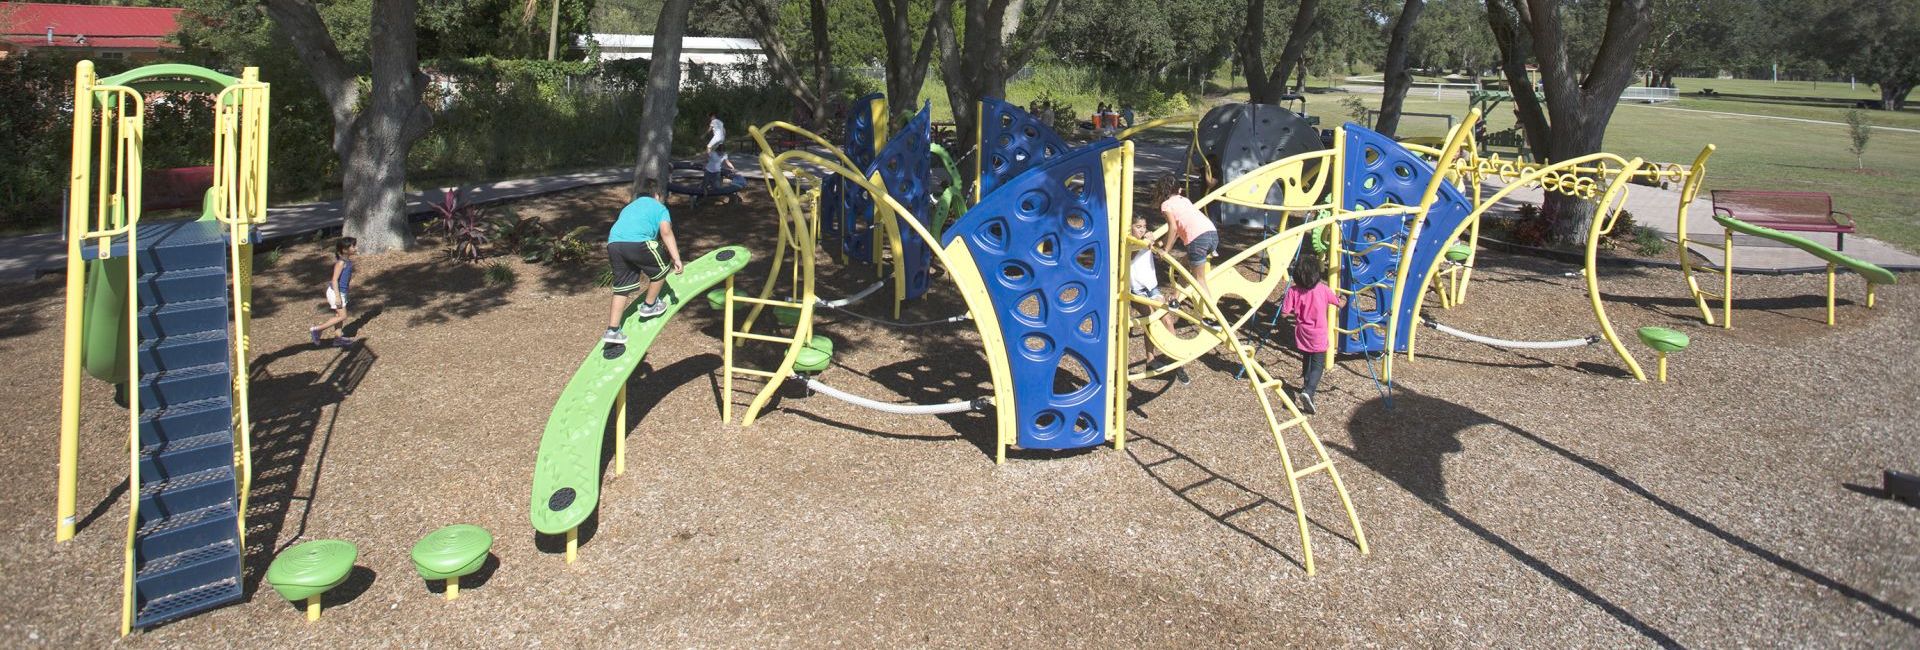 Featured image of Children playing on yellow, blue, and green climbing object at park